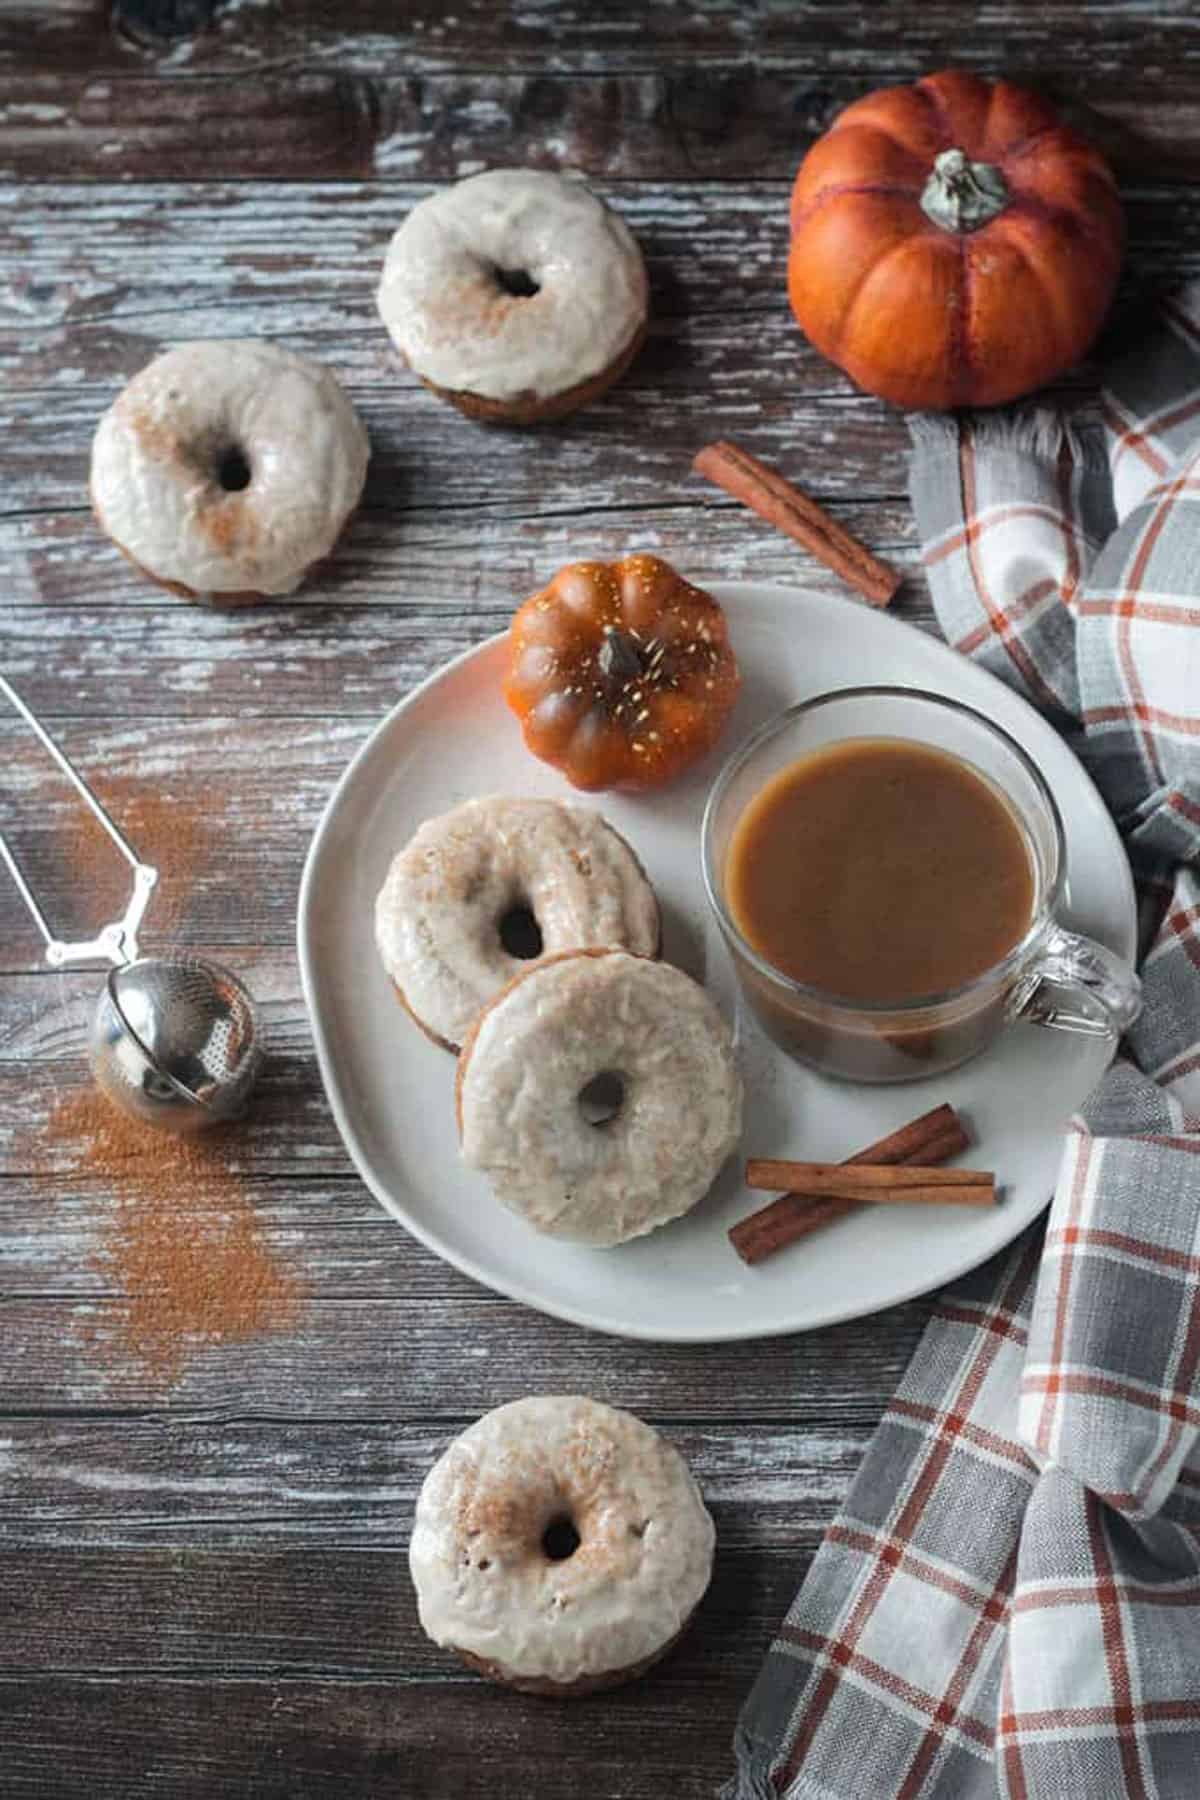 Two white frosted donuts on a plate with a glass mug of coffee and two cinnamon sticks.